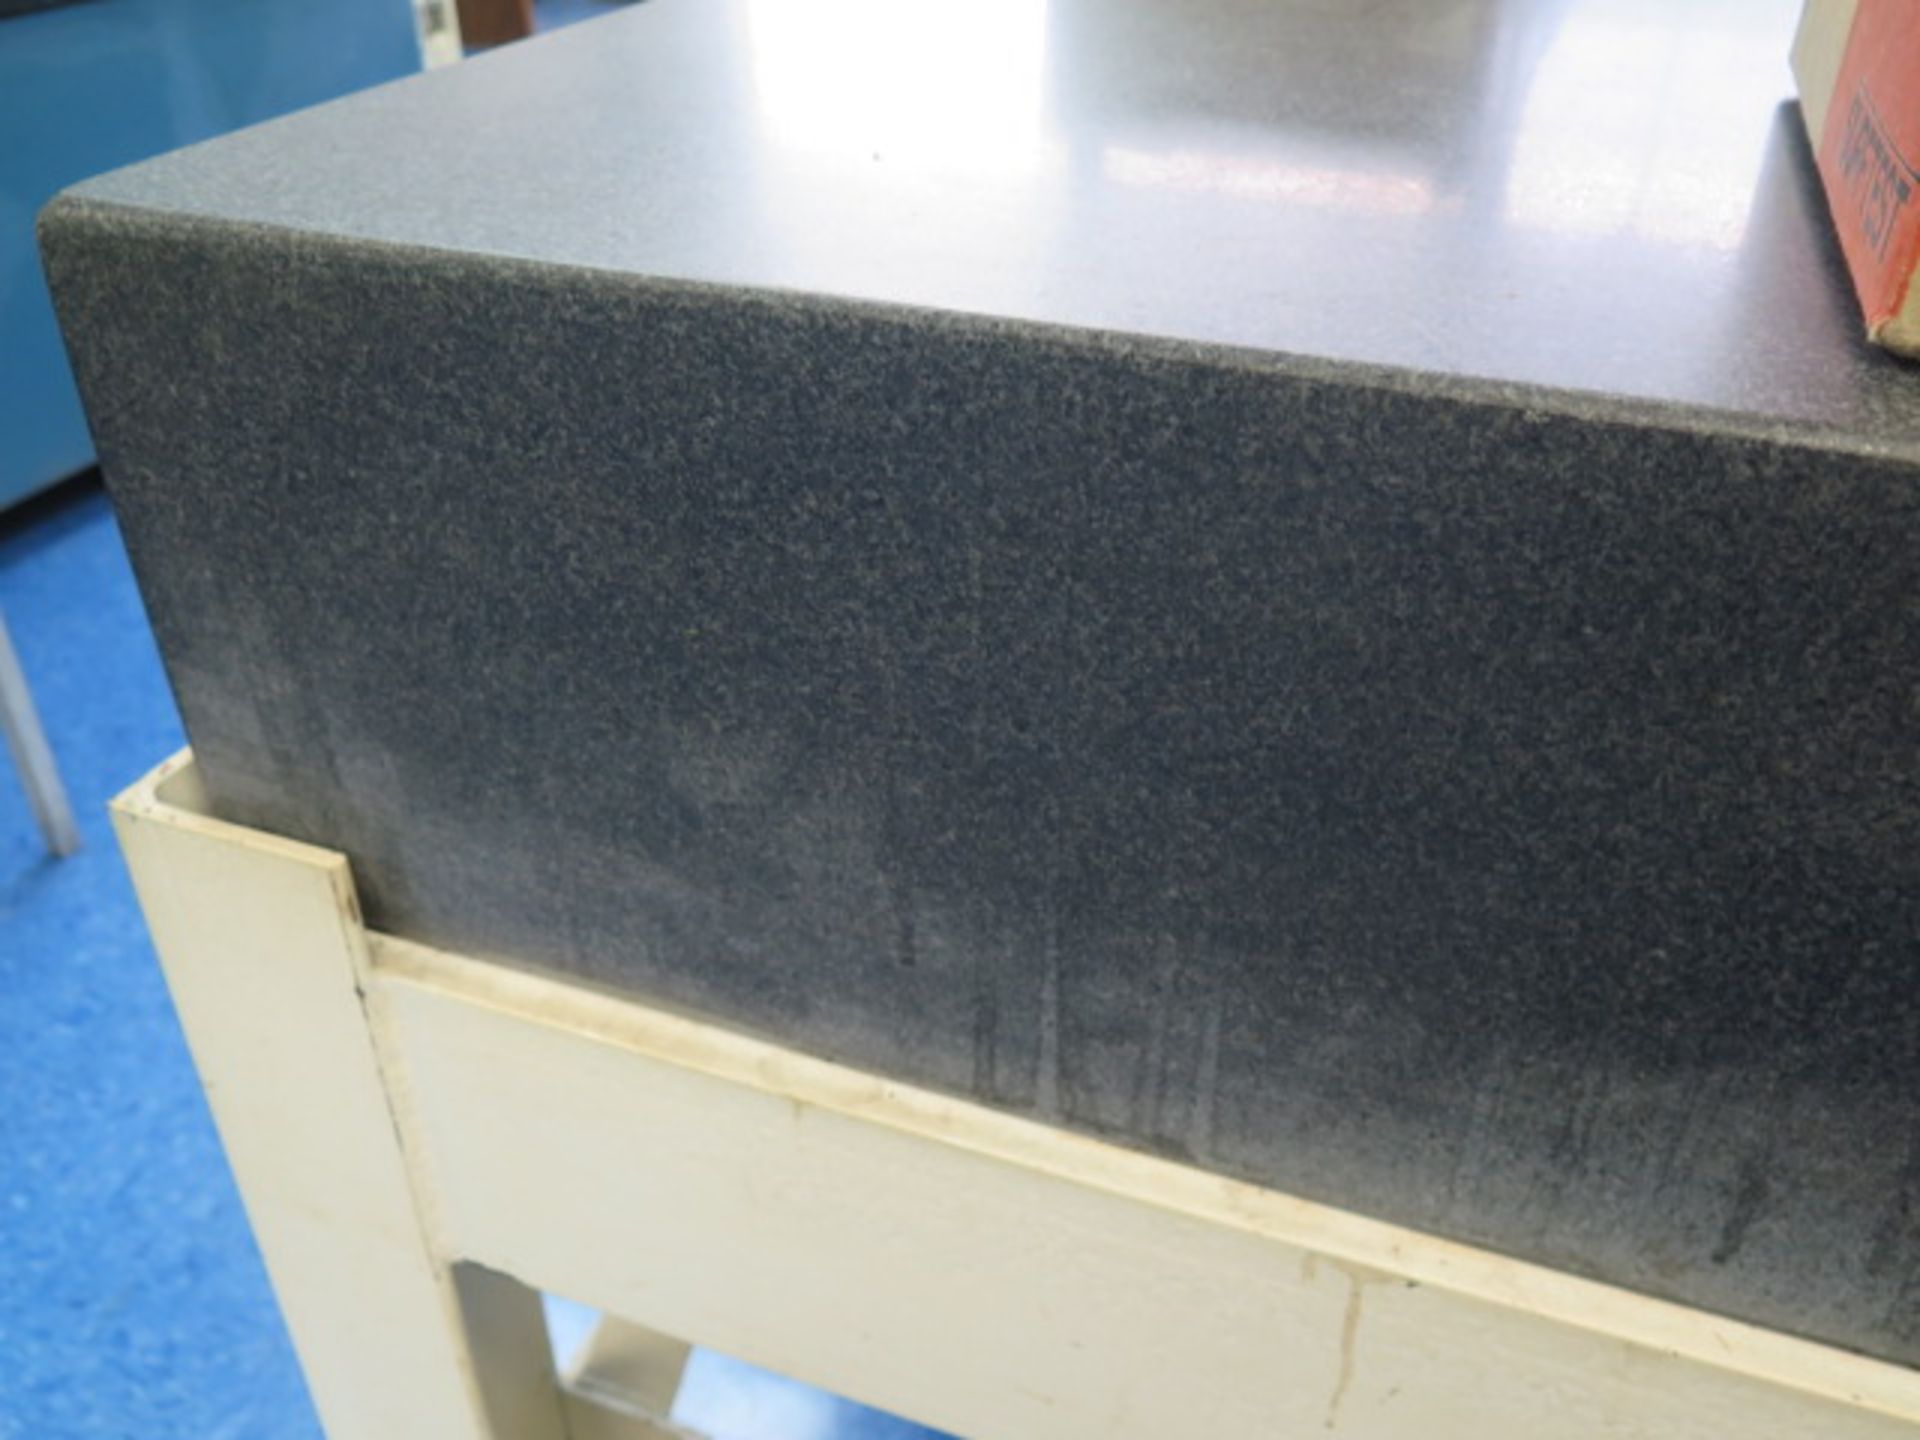 Microflat 48” x 96” x 10” Granite Surface Plate w/ Stand (SOLD AS-IS - NO WARRANTY) - Image 2 of 5